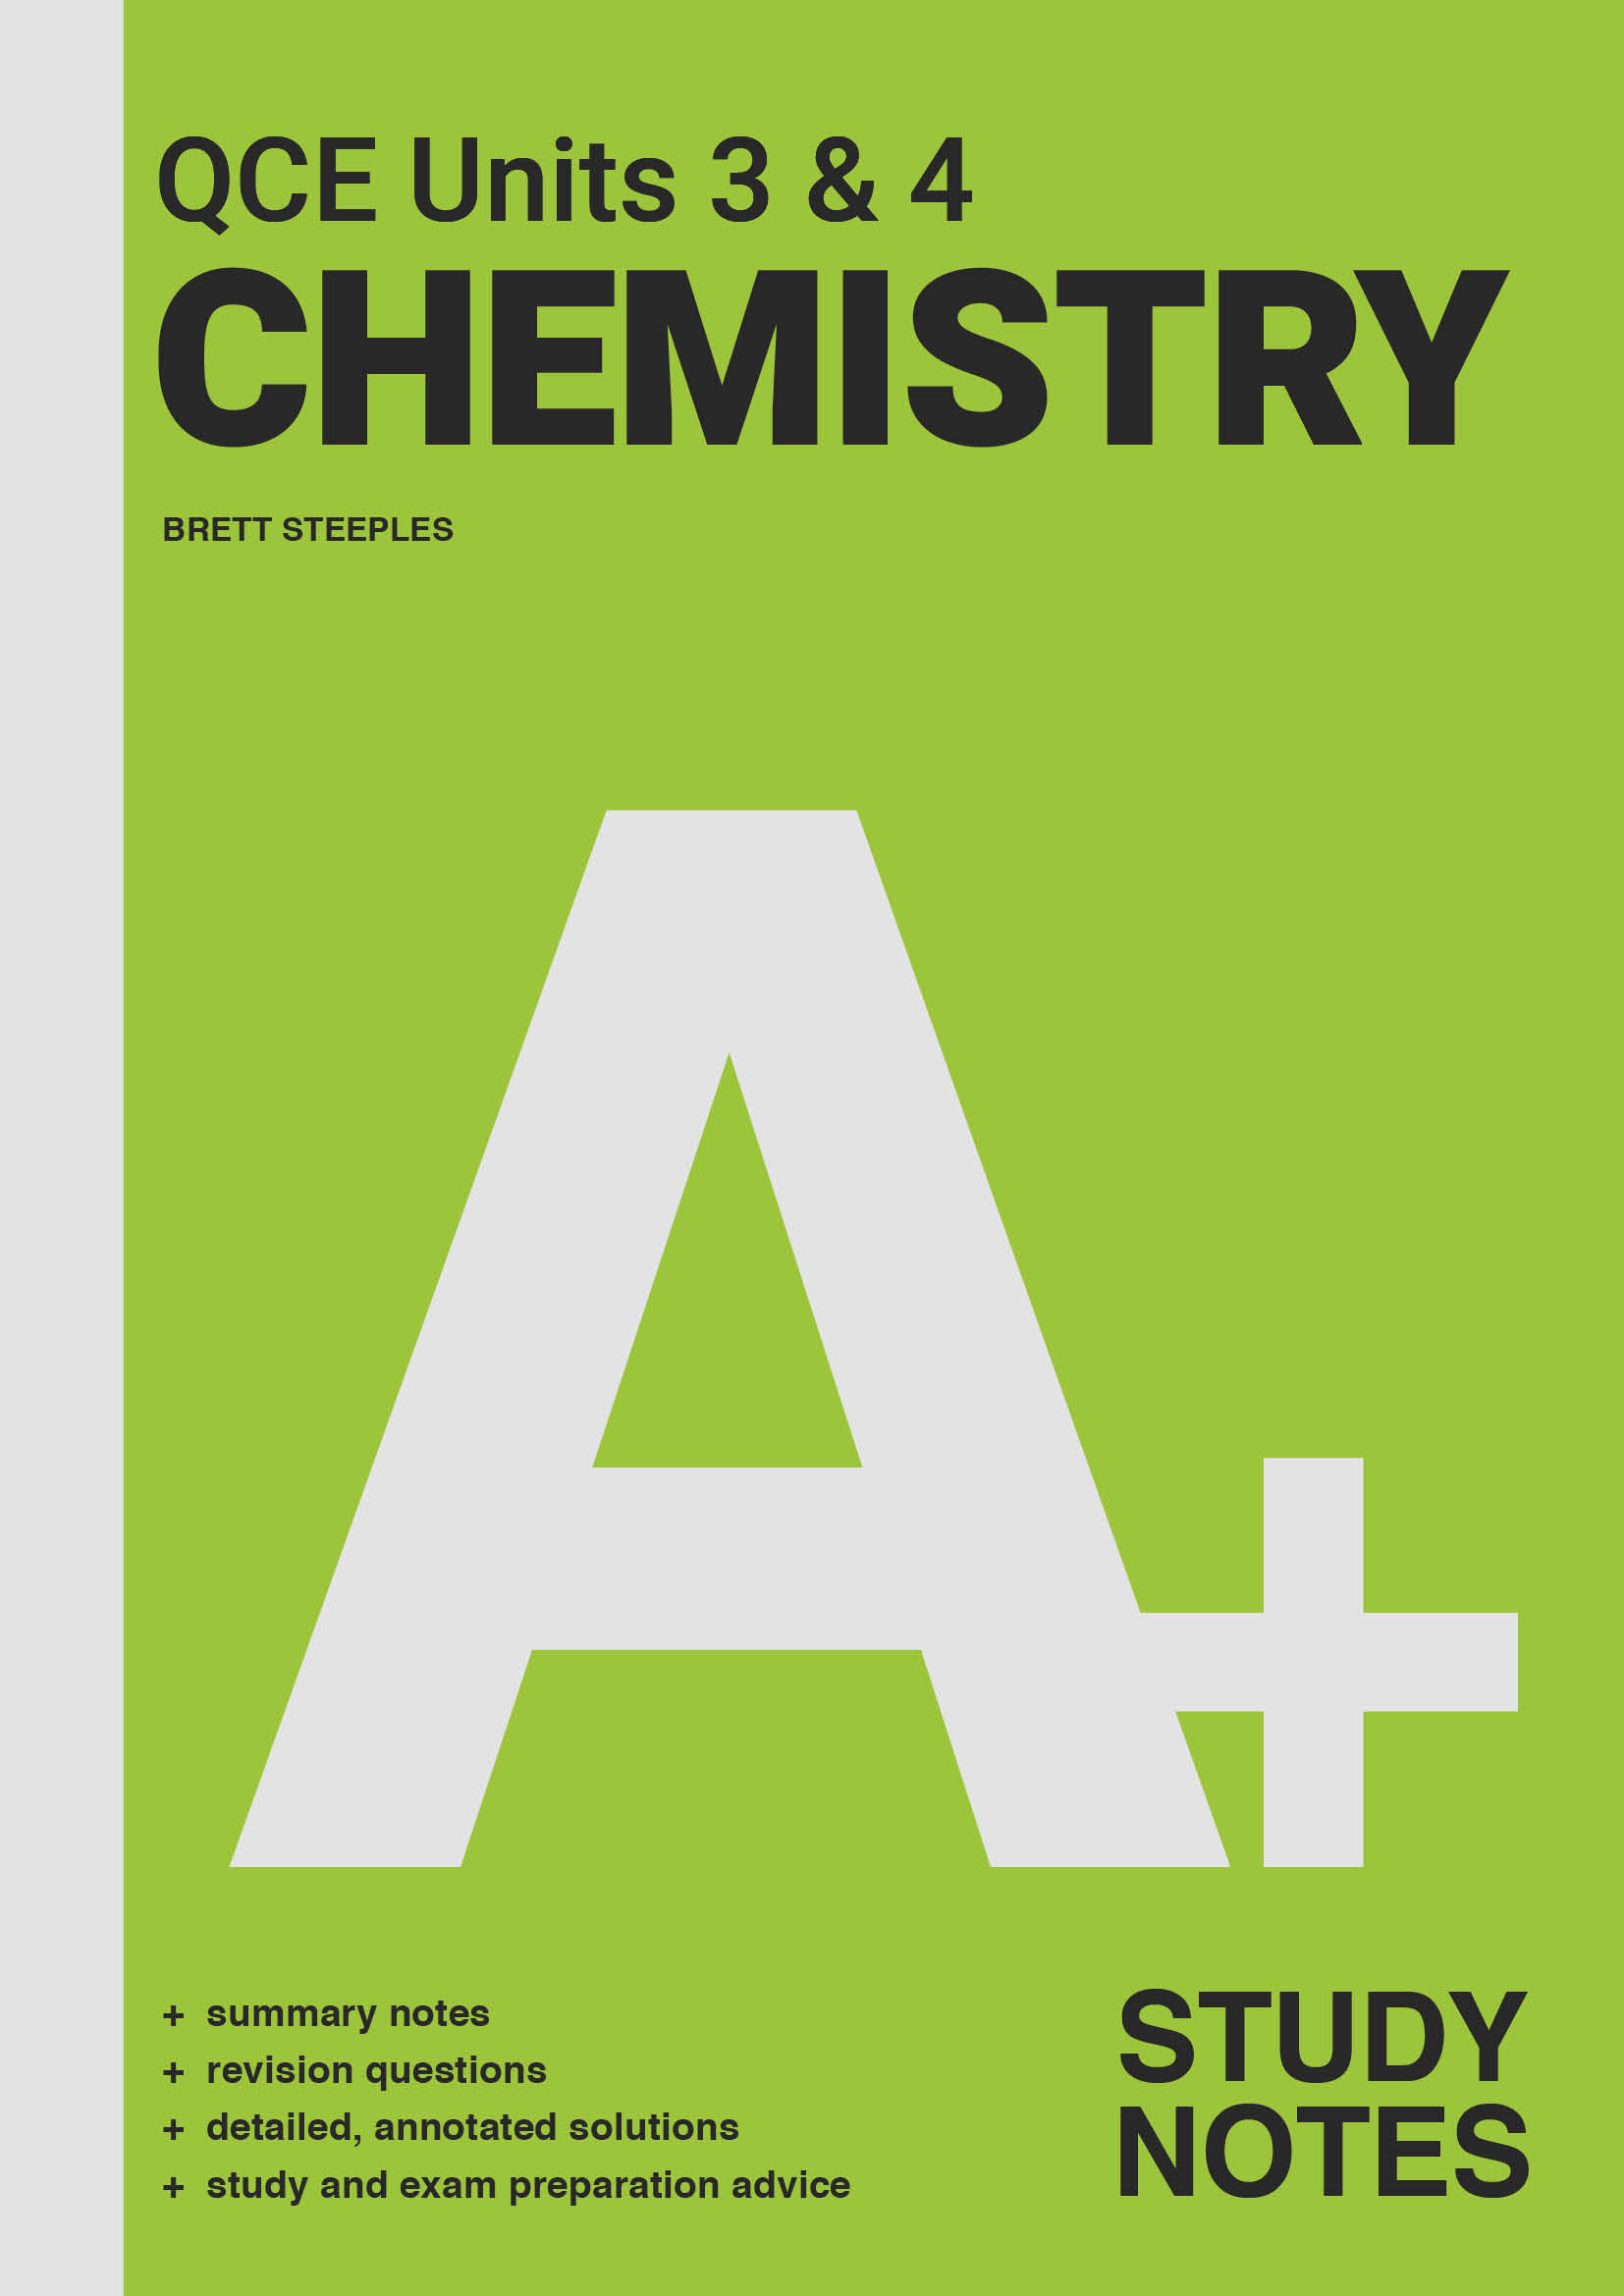 A+_QCE_chemistry_sn